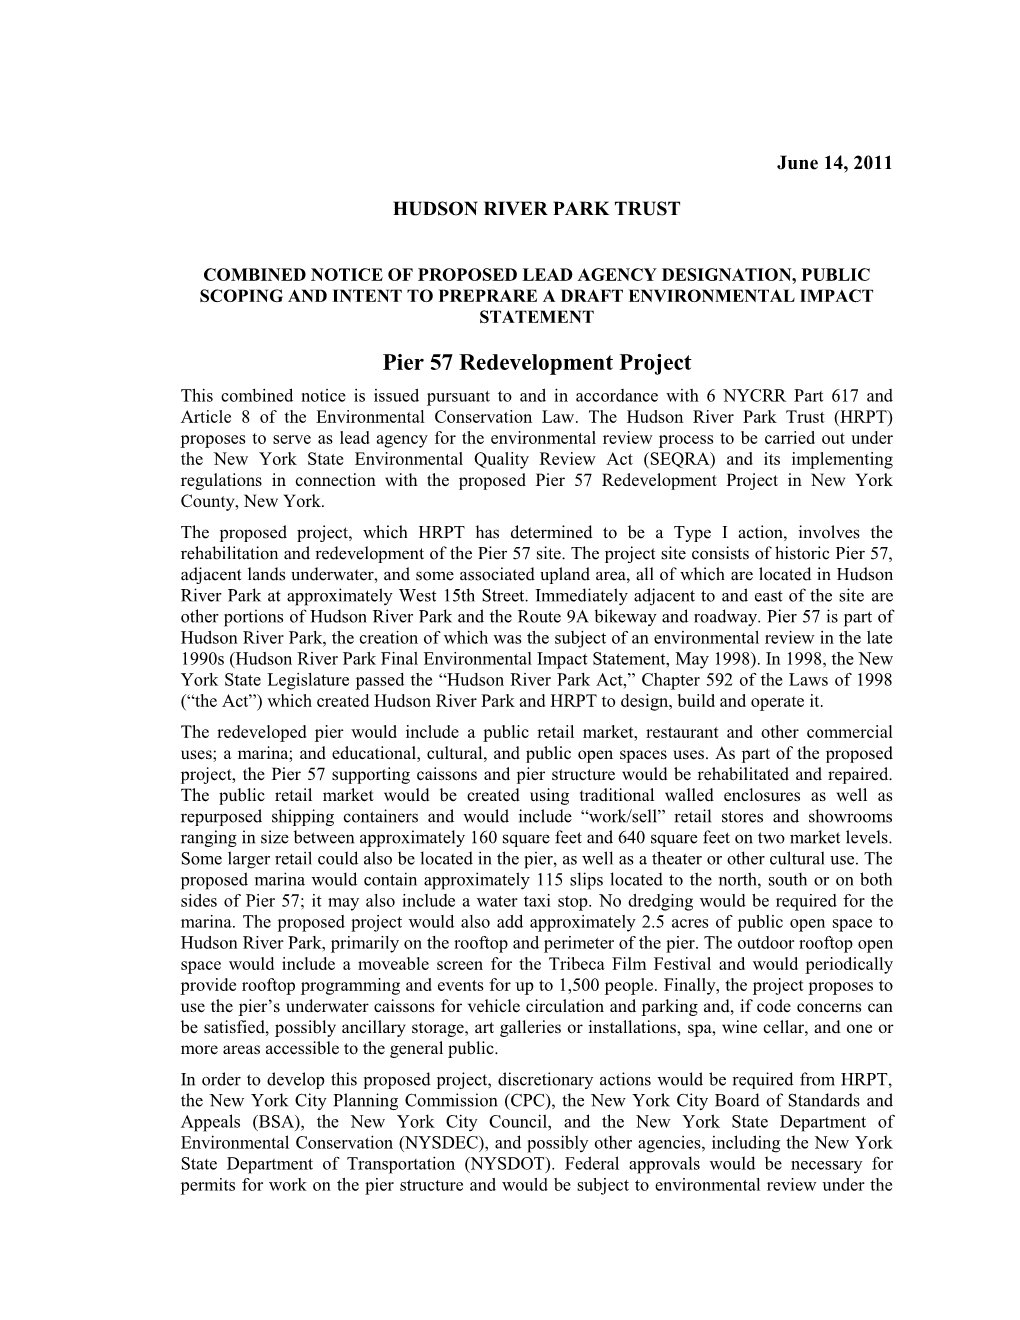 Pier 57 Redevelopment Project This Combined Notice Is Issued Pursuant to and in Accordance with 6 NYCRR Part 617 and Article 8 of the Environmental Conservation Law